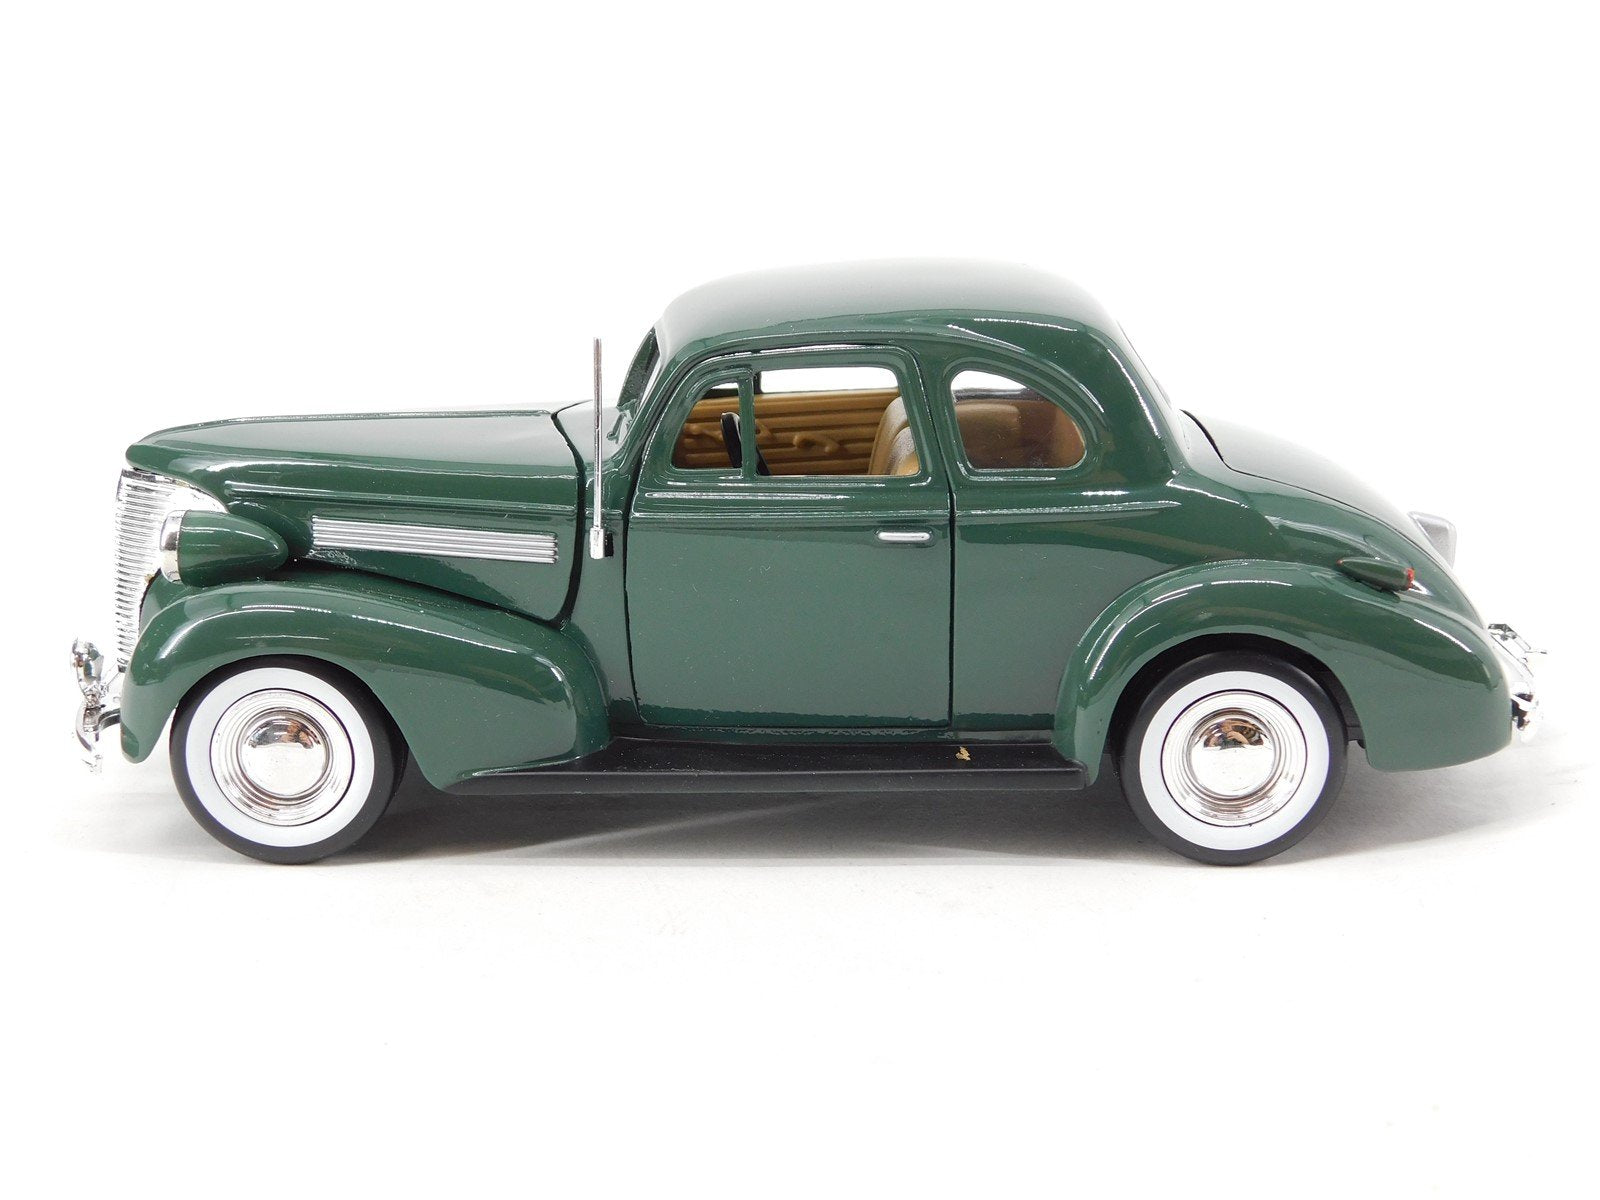 1:24 Scale Motor Max #73247 Die-Cast 1939 Chevrolet Coupe - Green